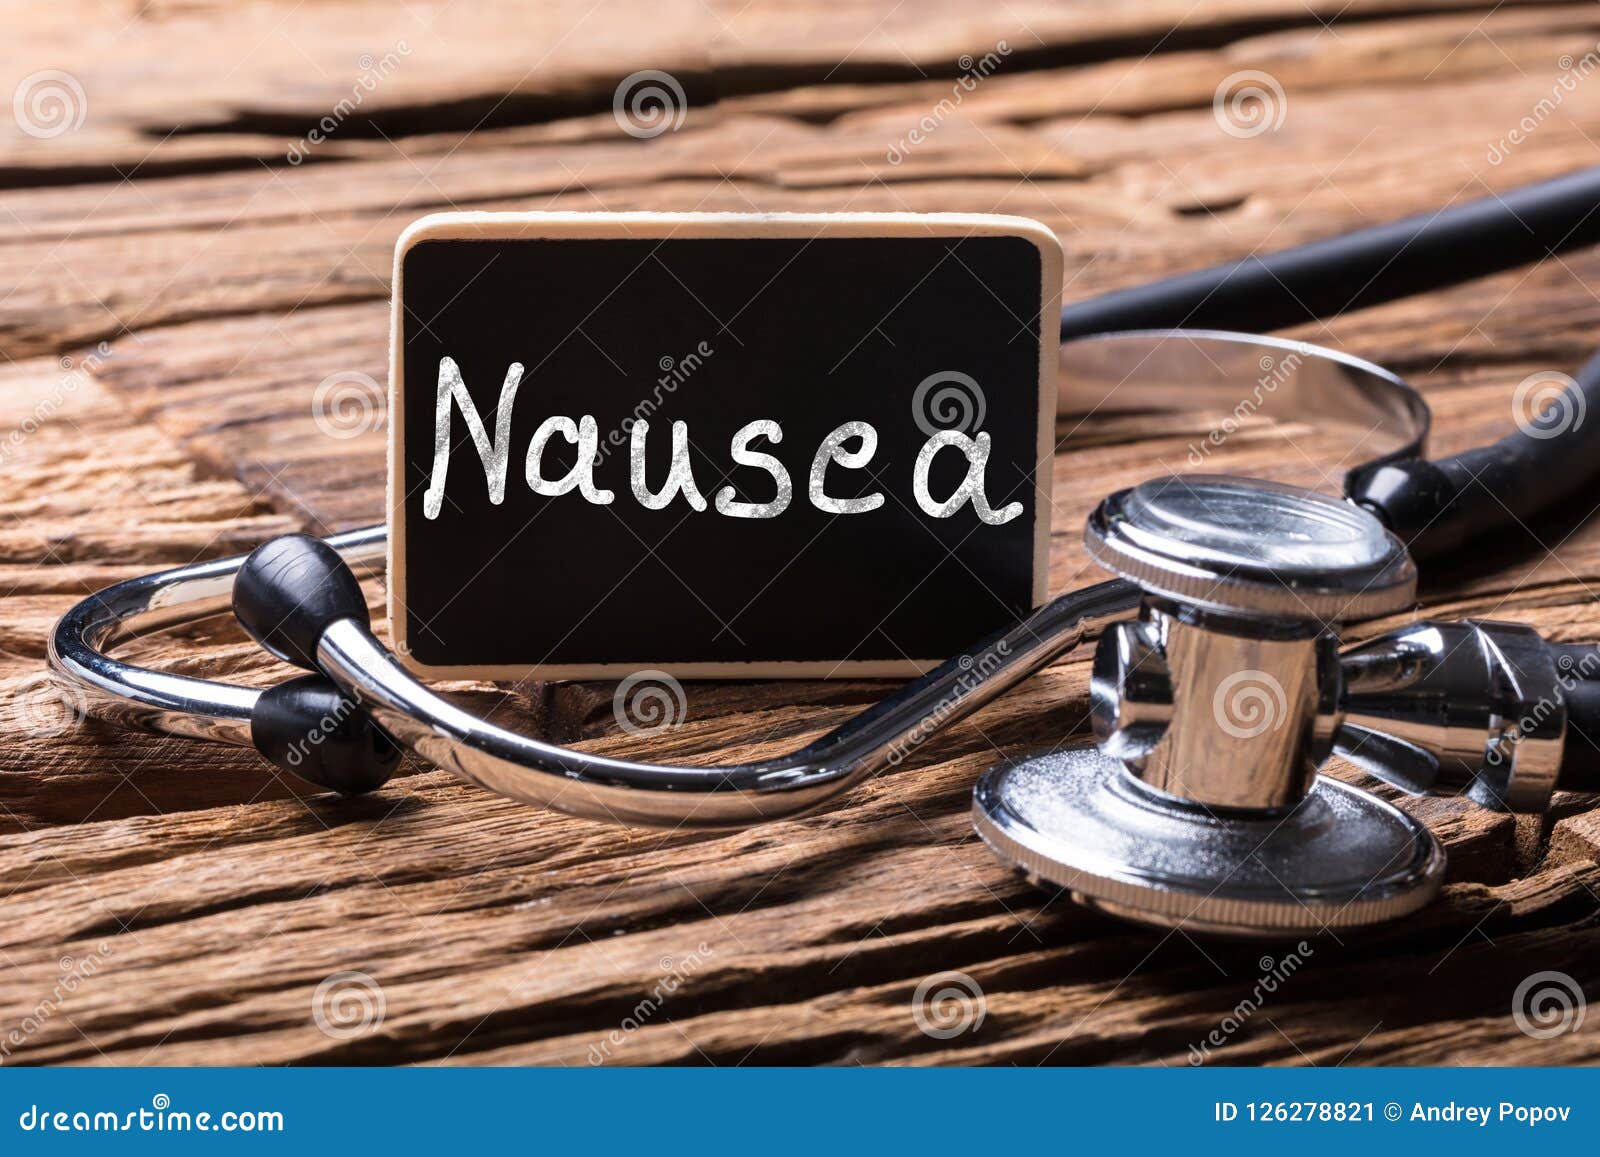 close-up of stethoscope with slate showing nausea text